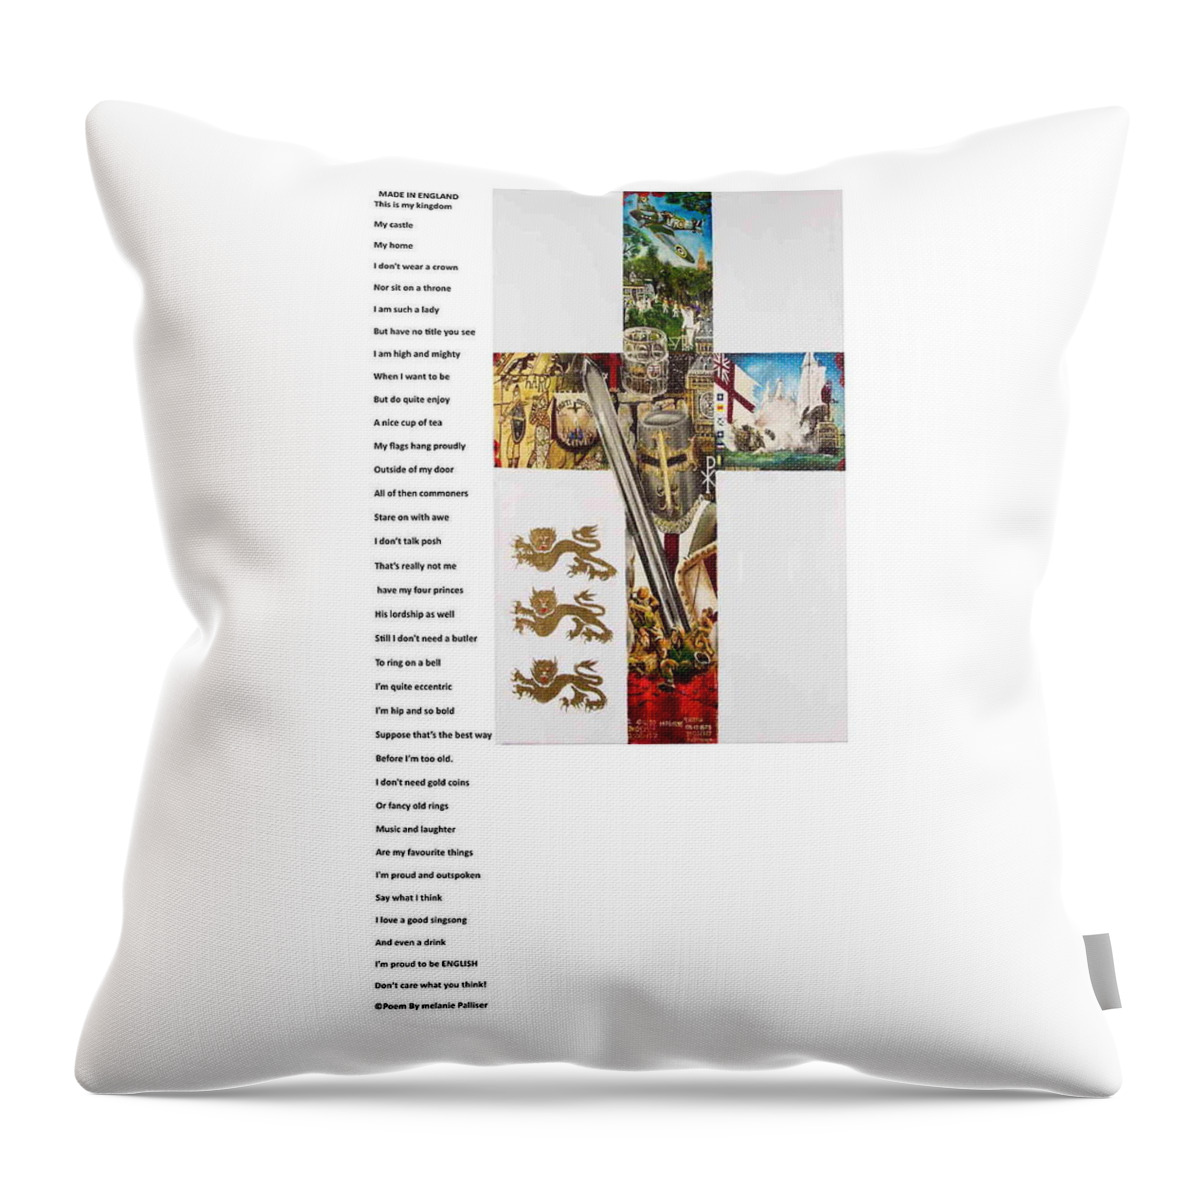 Made In England Throw Pillow featuring the painting Made In England by Melanie Palliser